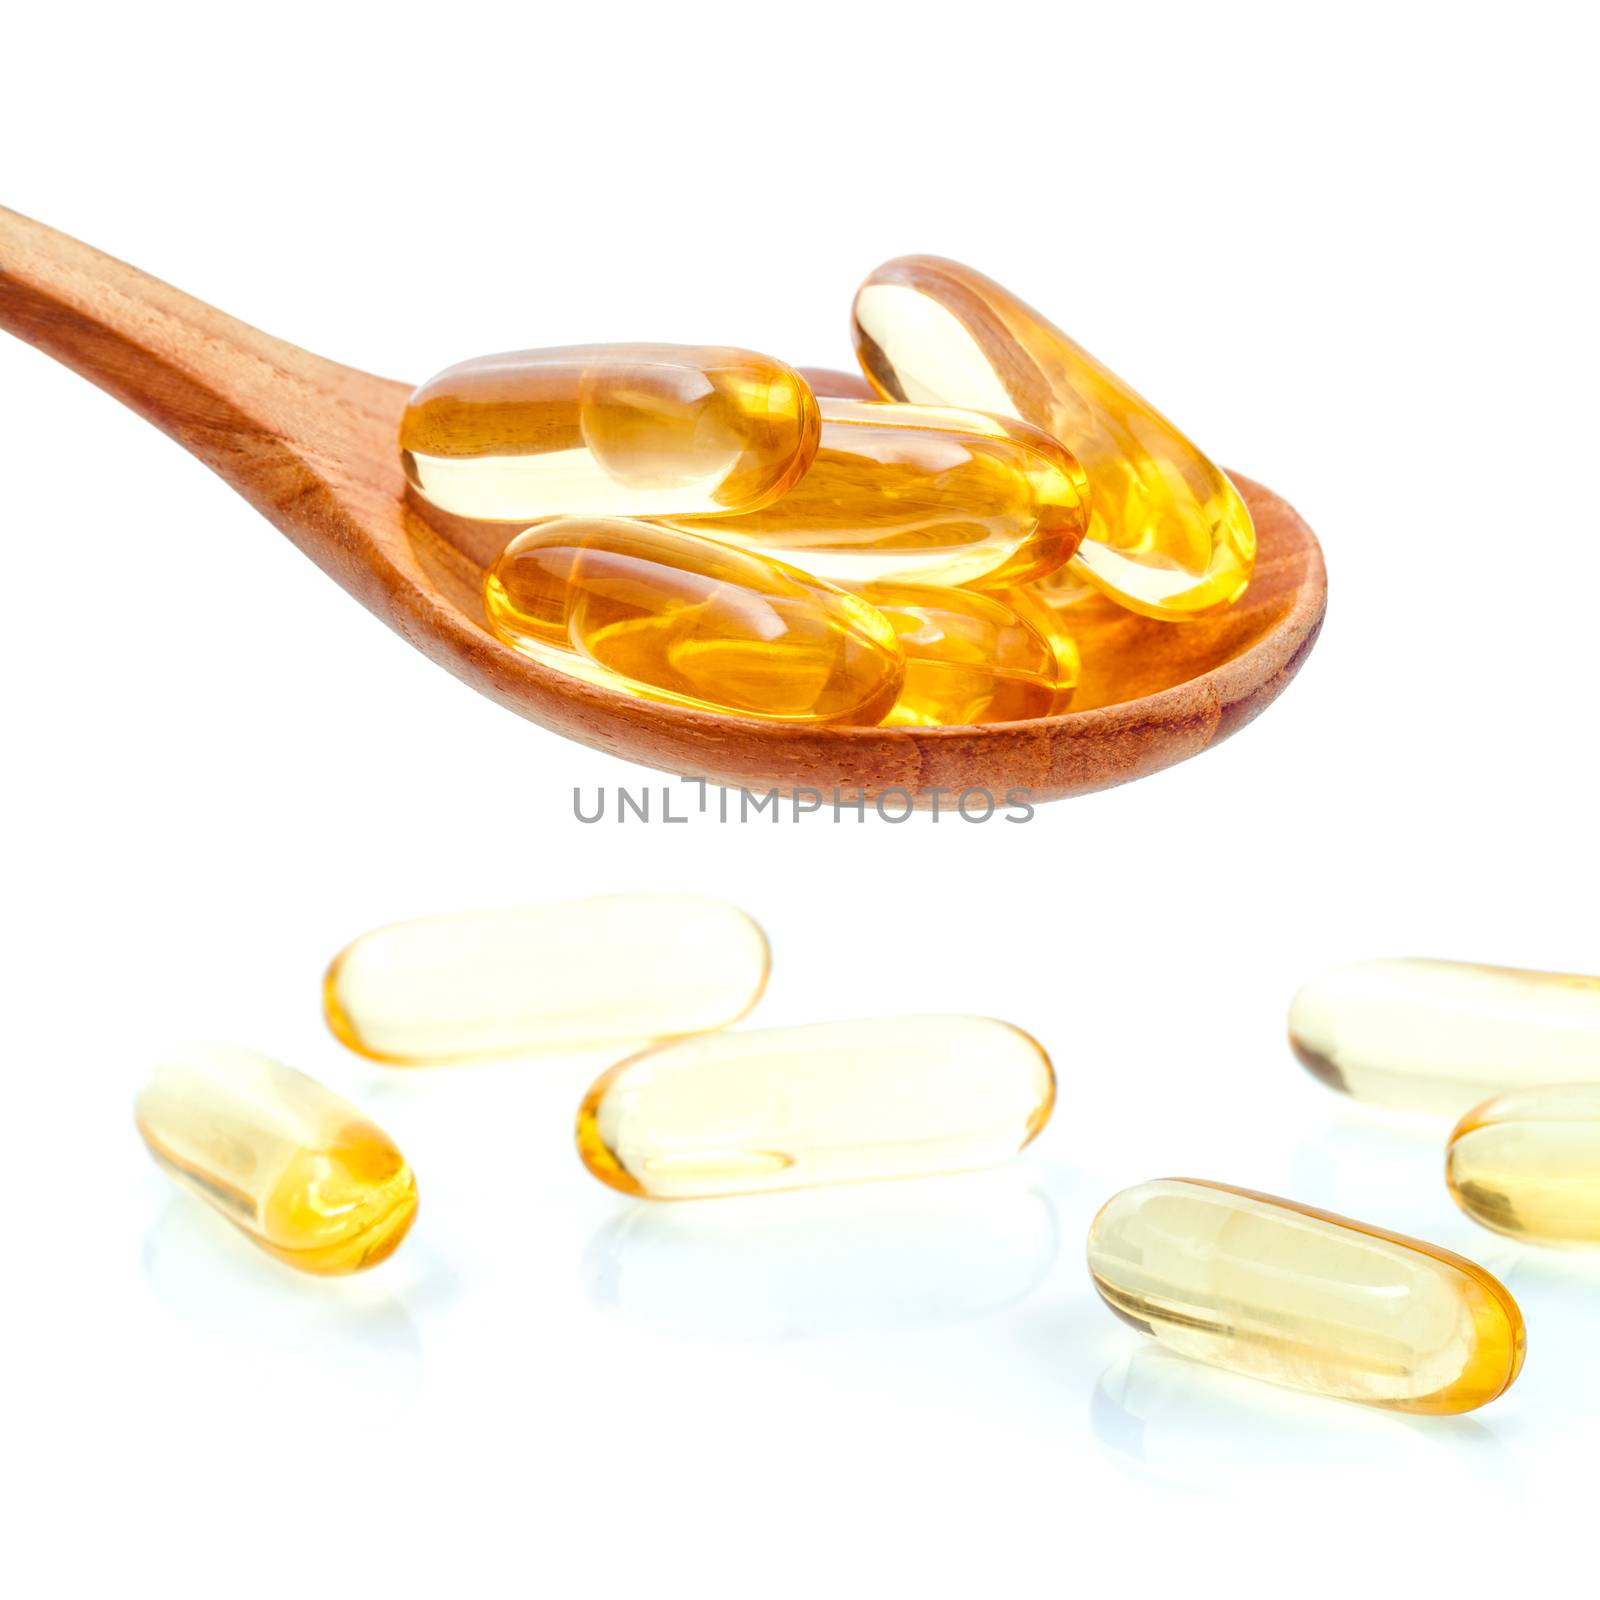 Spoonful of gel capsules of omega 3. Close up capsules fish oil in wooden spoon .The supplement high vitamin E, omega 3 and DHA . Capsules fish oil with selective focus isolate on white background